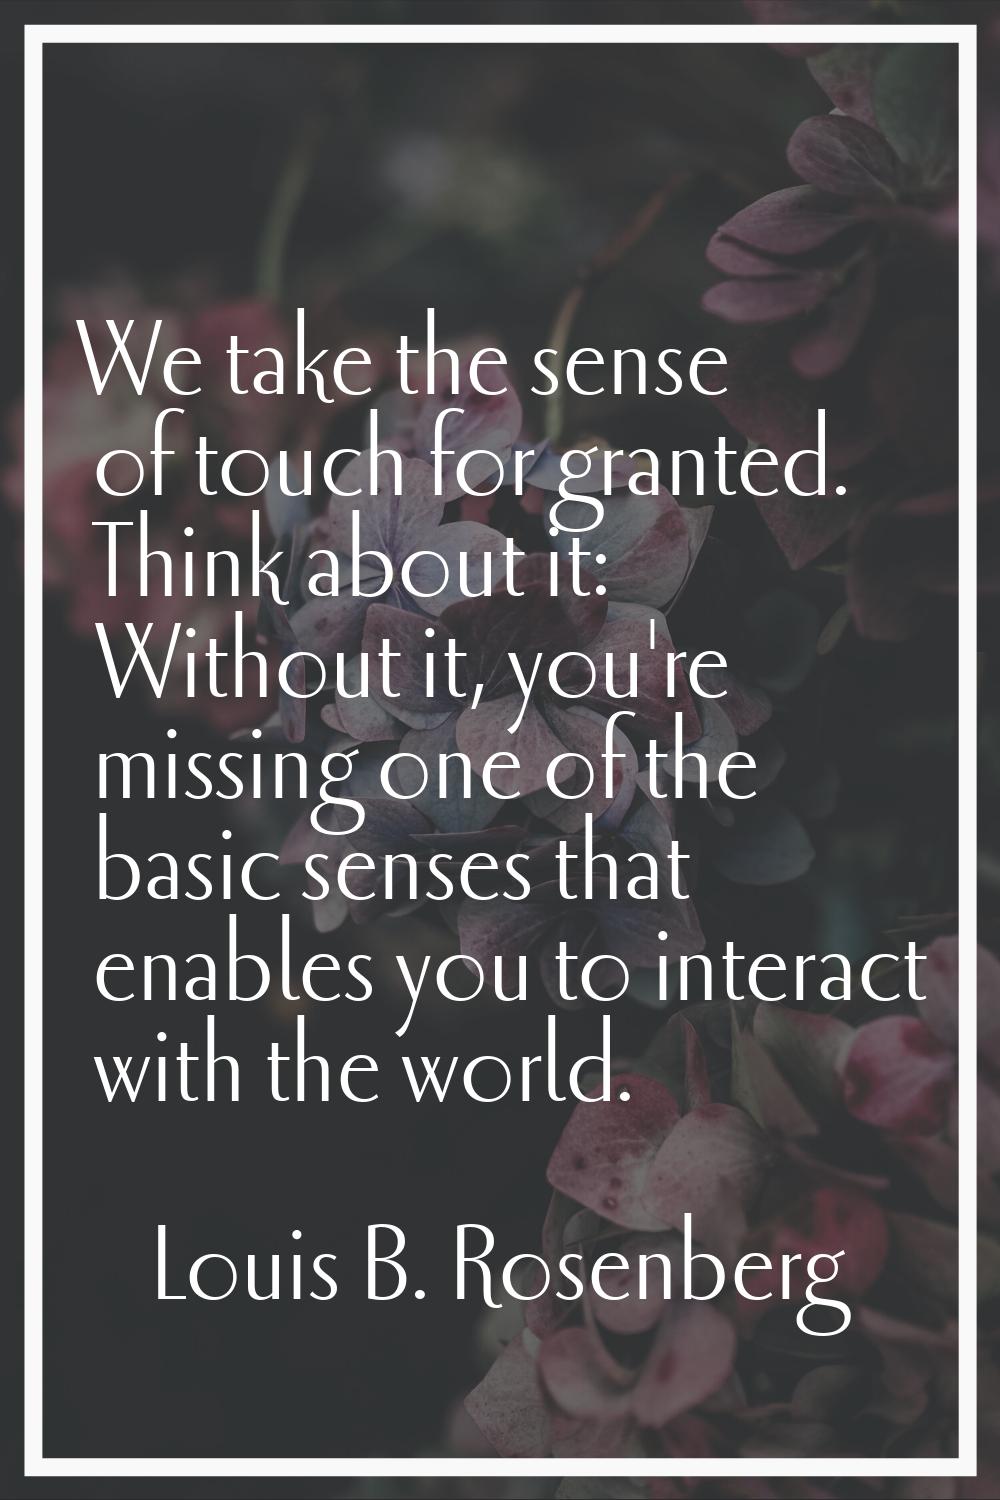 We take the sense of touch for granted. Think about it: Without it, you're missing one of the basic